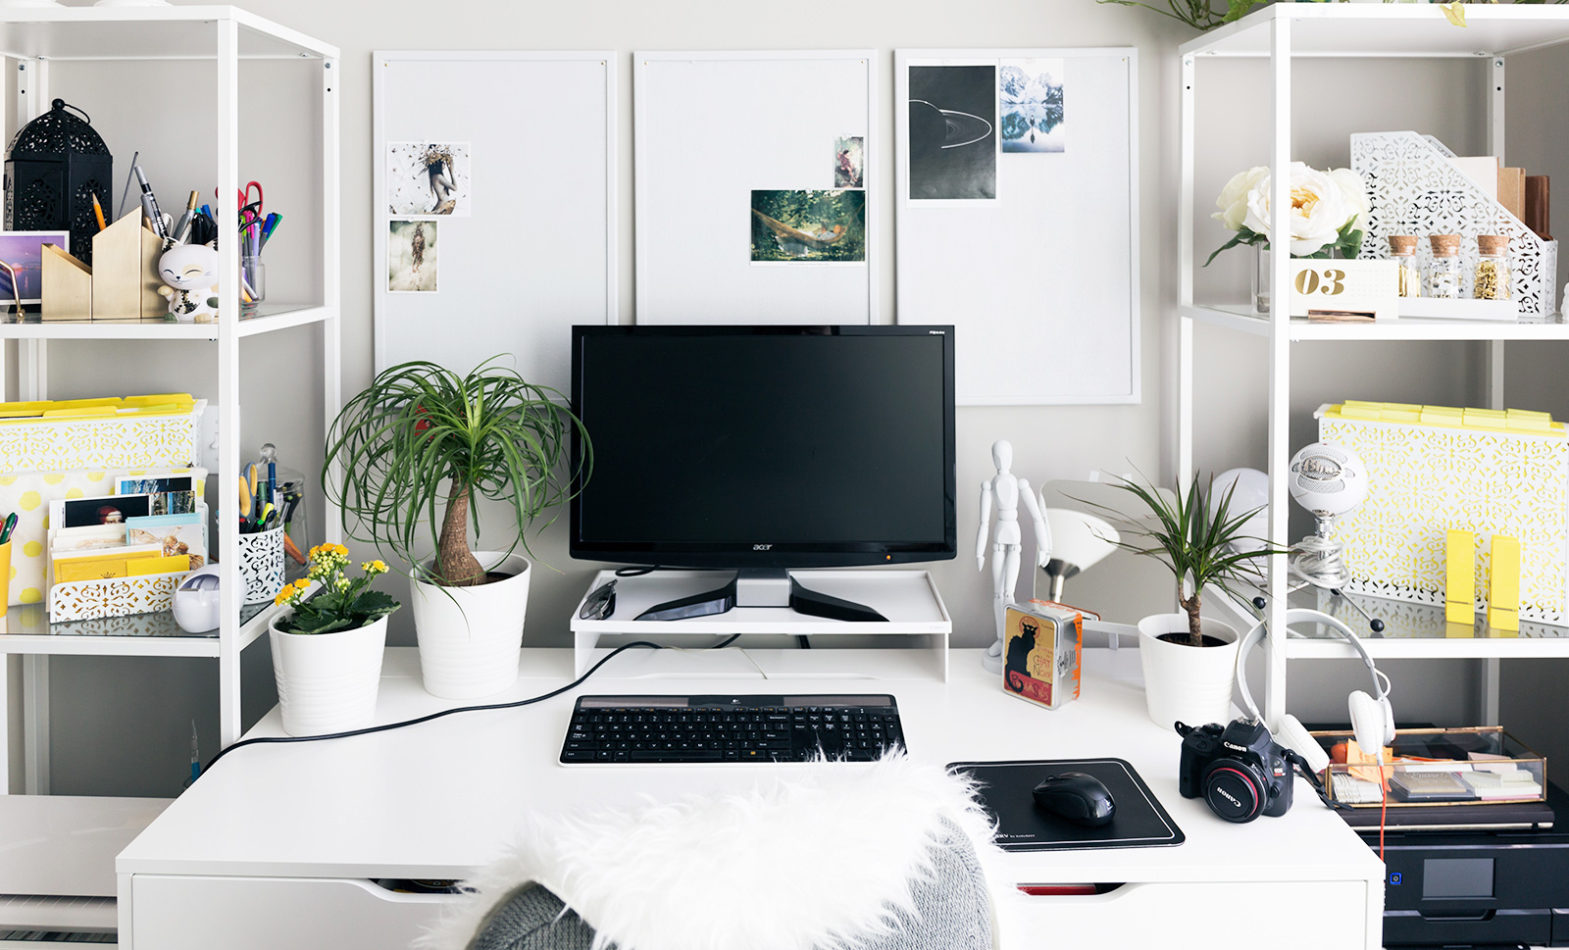 A white workspace with black gadgets